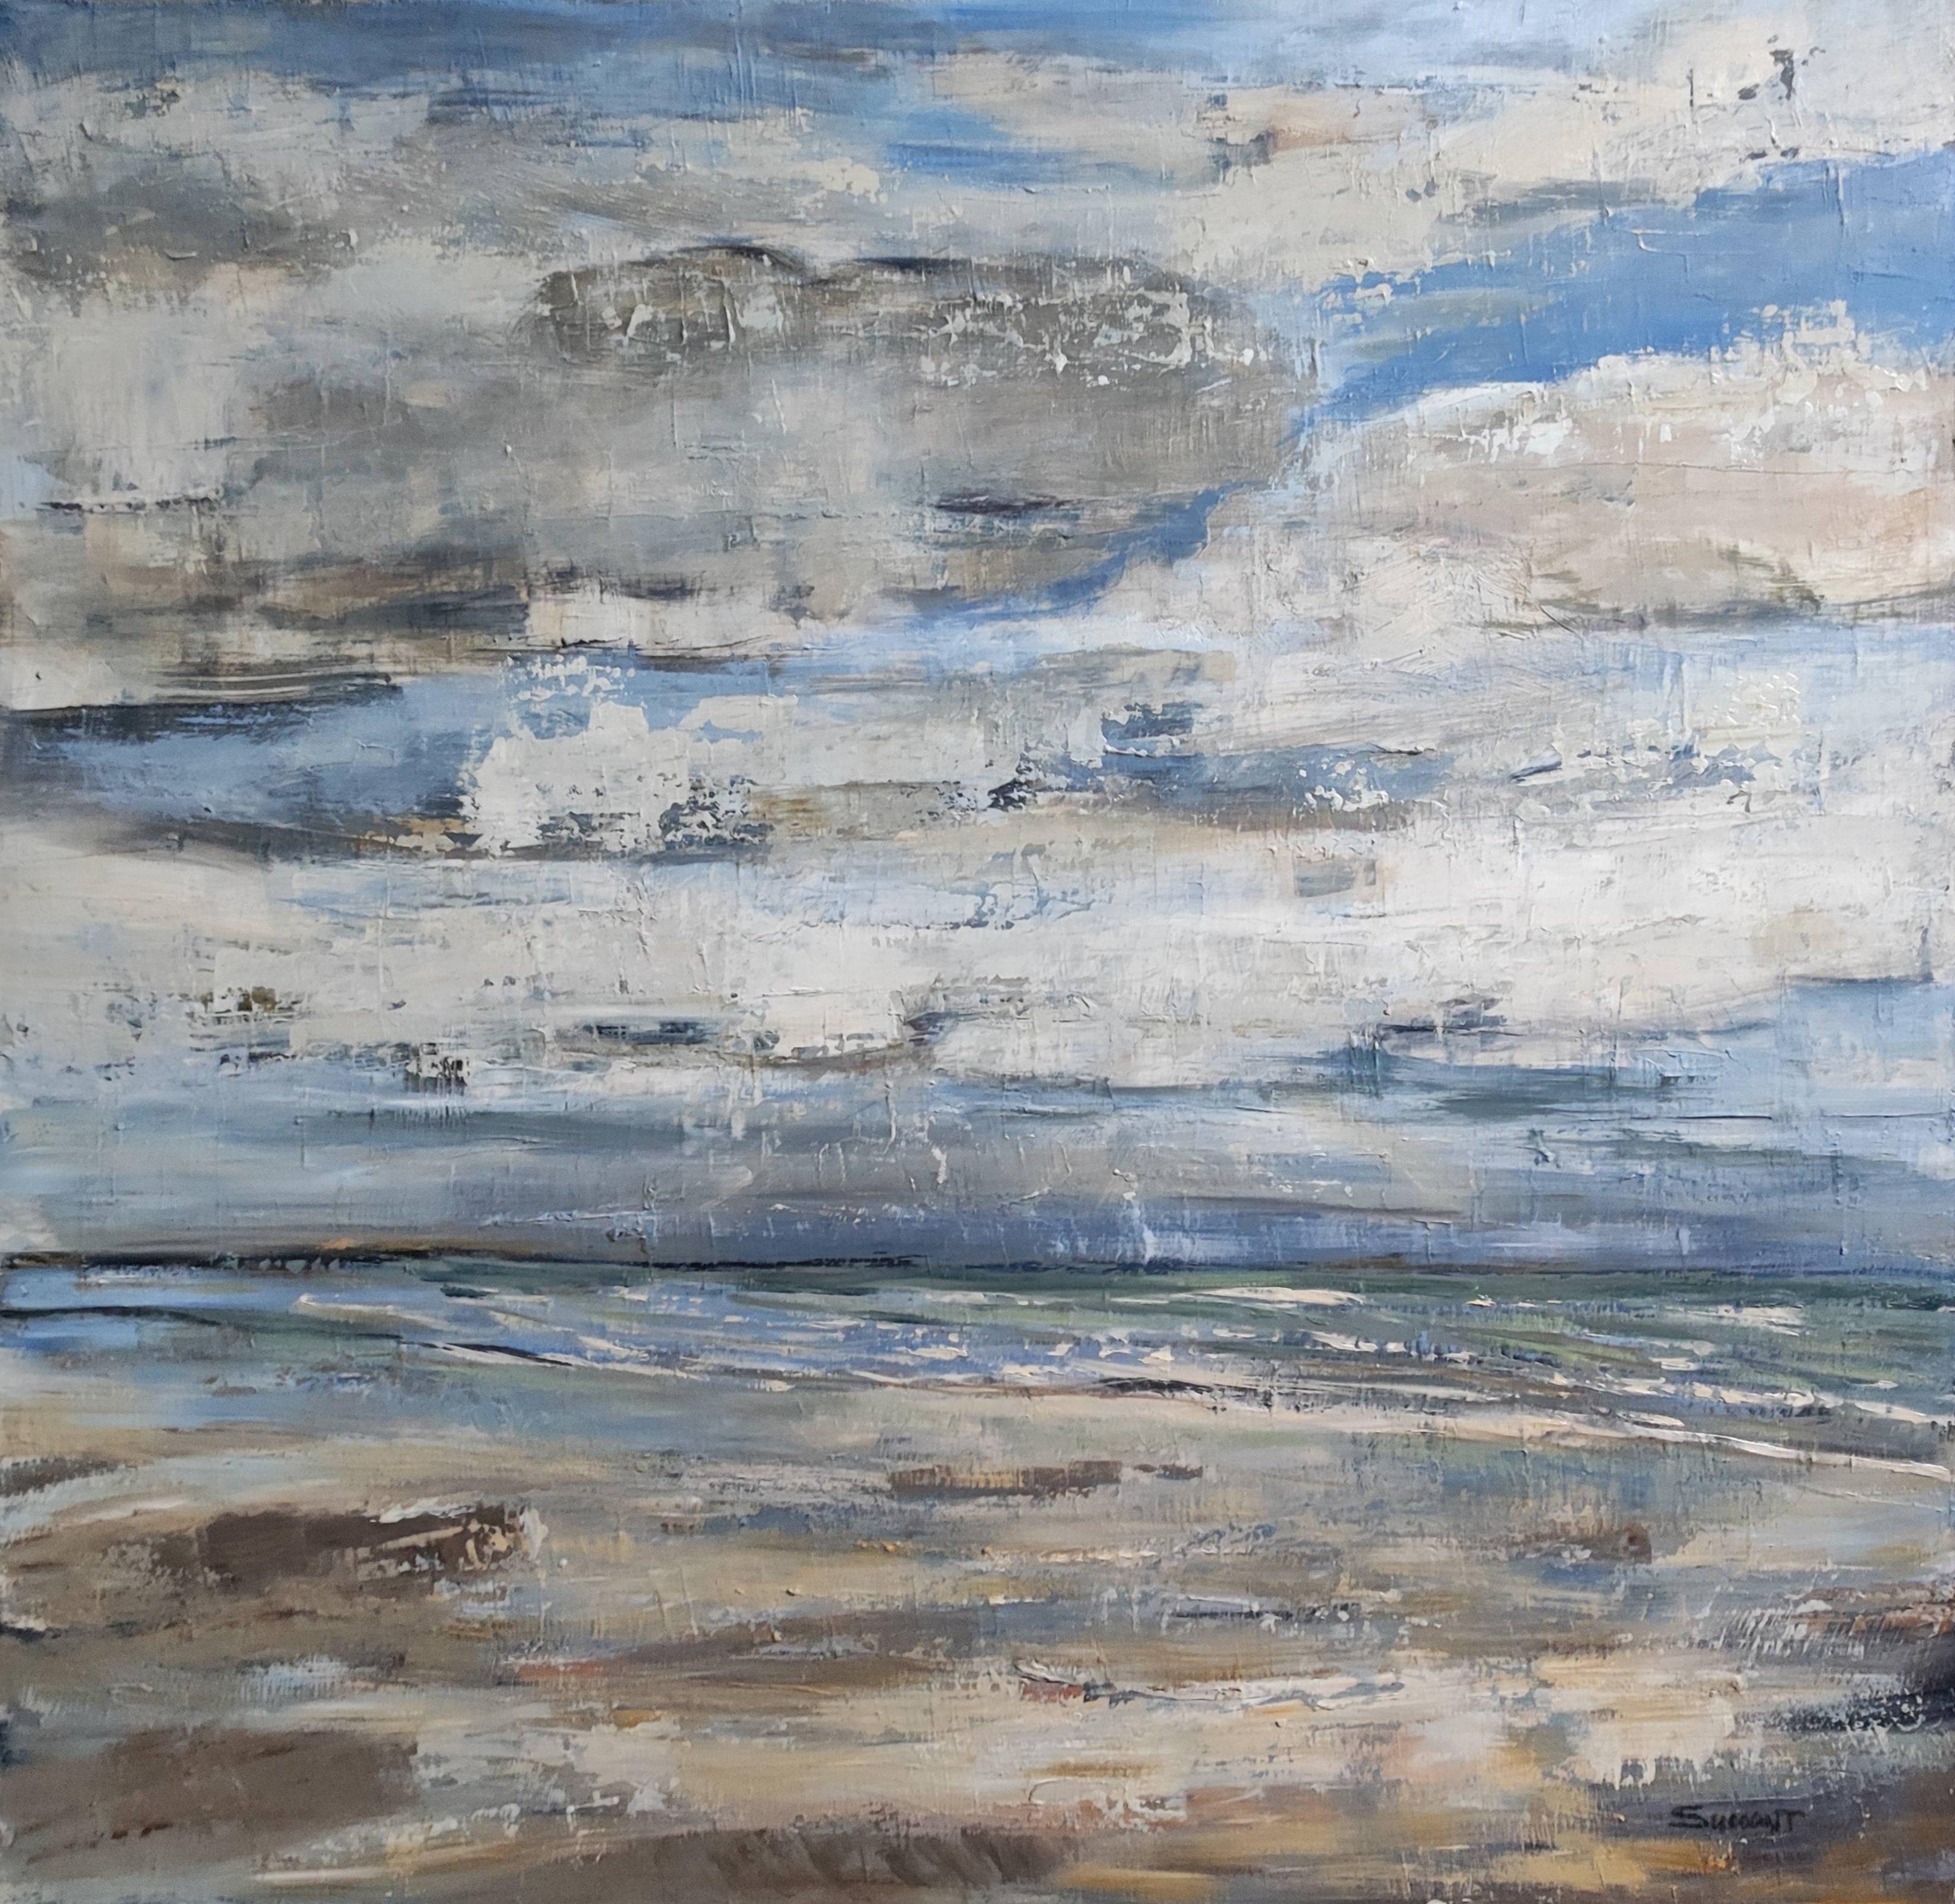 GRAY SKY, Marine, seaside, Oil on canvas, Semi-abstract, Blue, Impressionism - Painting by SOPHIE DUMONT